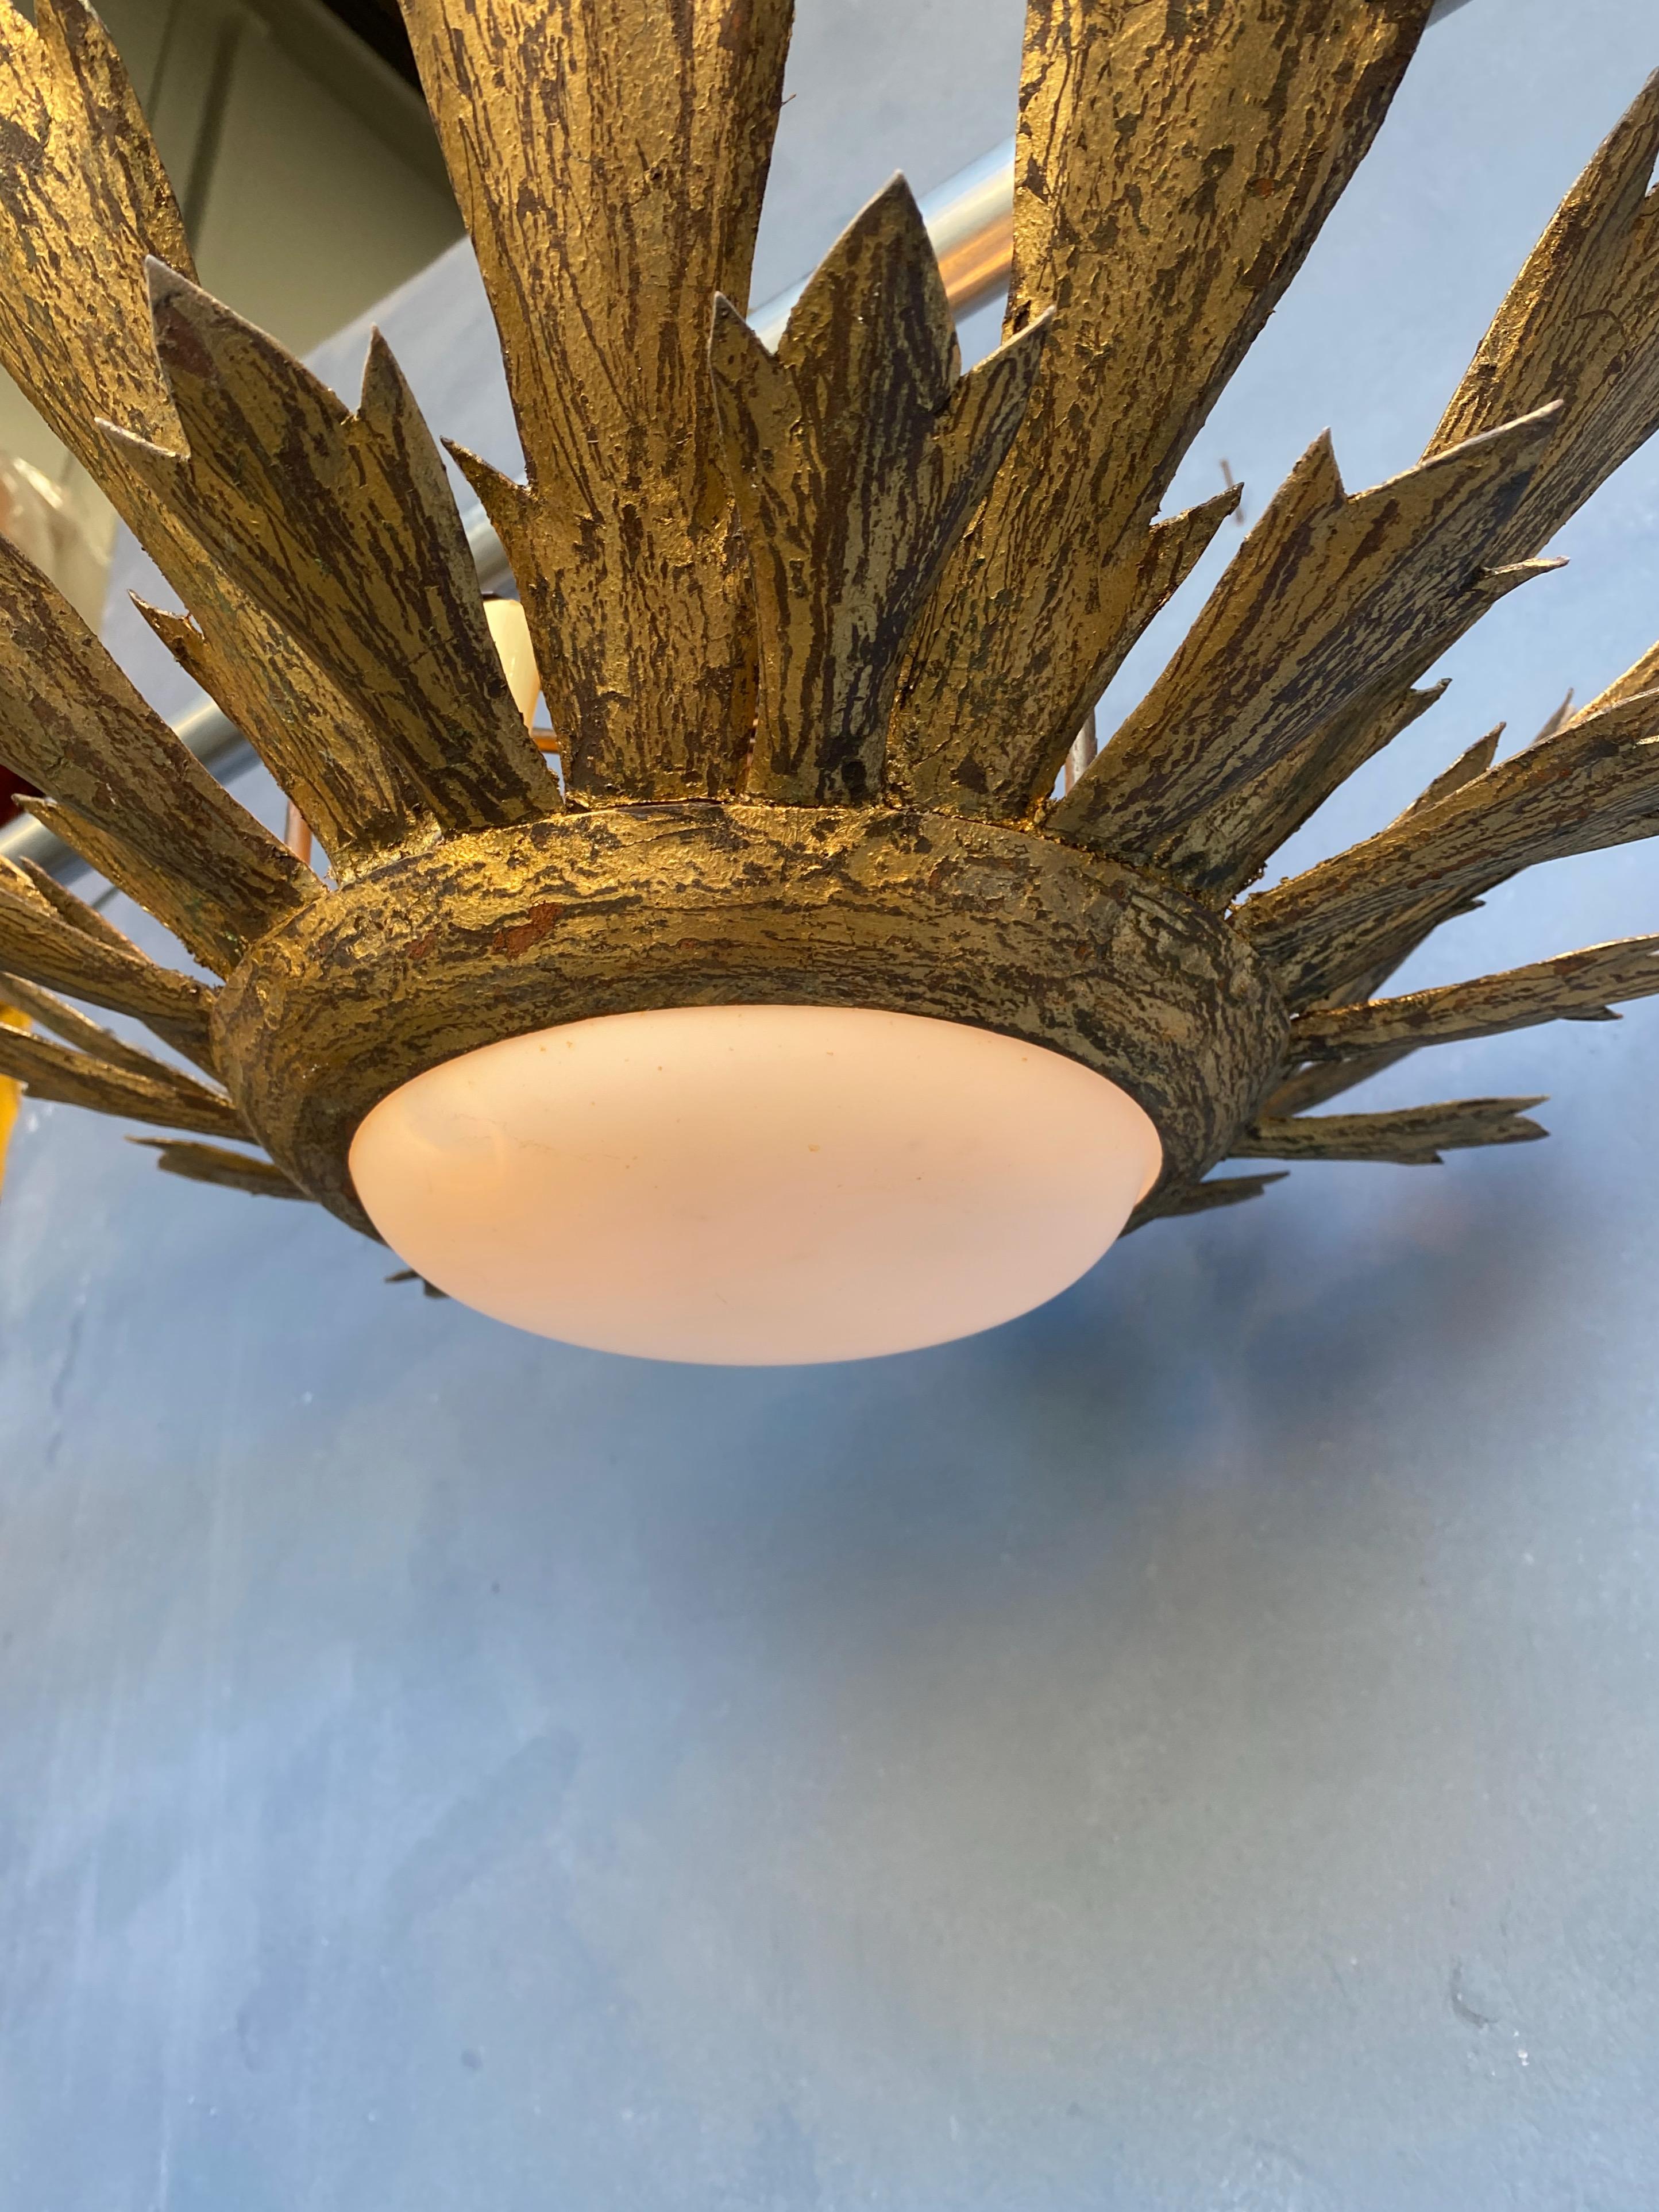 This unique flush mount ceiling fixture is defined by its radiating stylized leaves. Composed of two tiers of pointed leaves - a larger one and a smaller one, they're joined at the base with an expansive decorative band. The original central globe